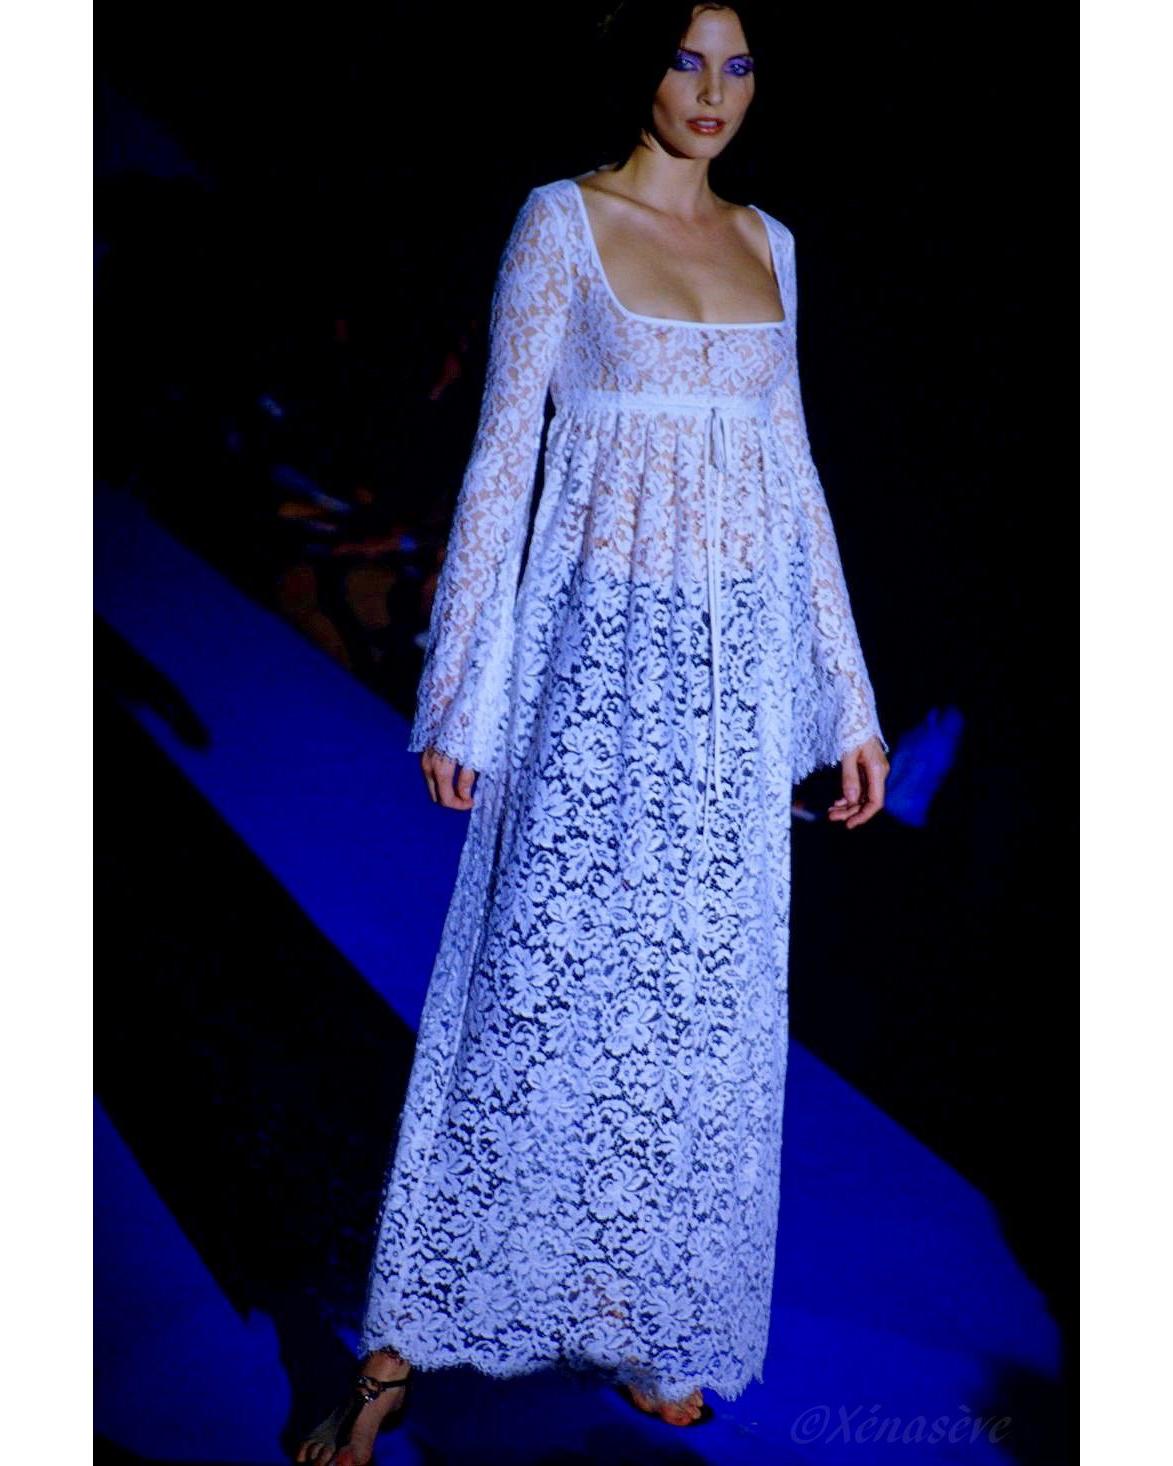 S/S 1996 Gucci by Tom Ford White Lace Gown with Nude Lining 5